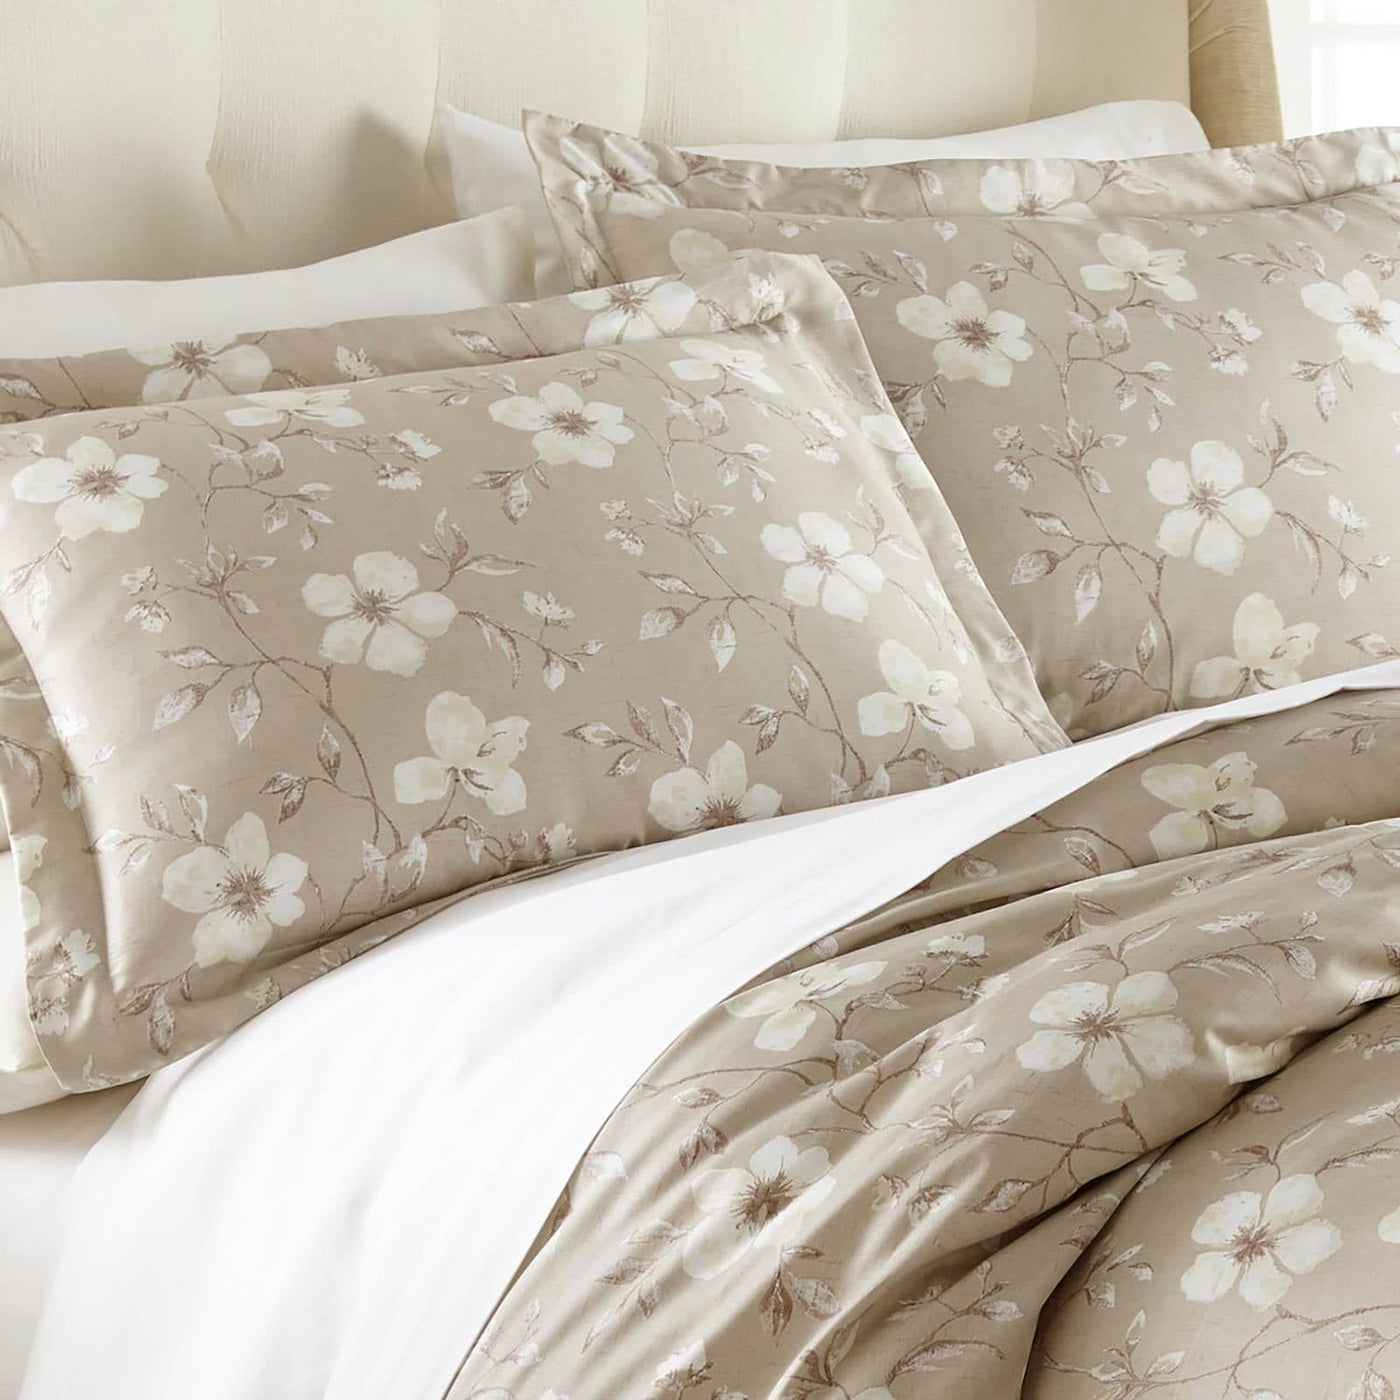 Mystic Garden Reversible Cotton Duvet Set in Mystic Taupe Grey#color_mystic-taupe-grey